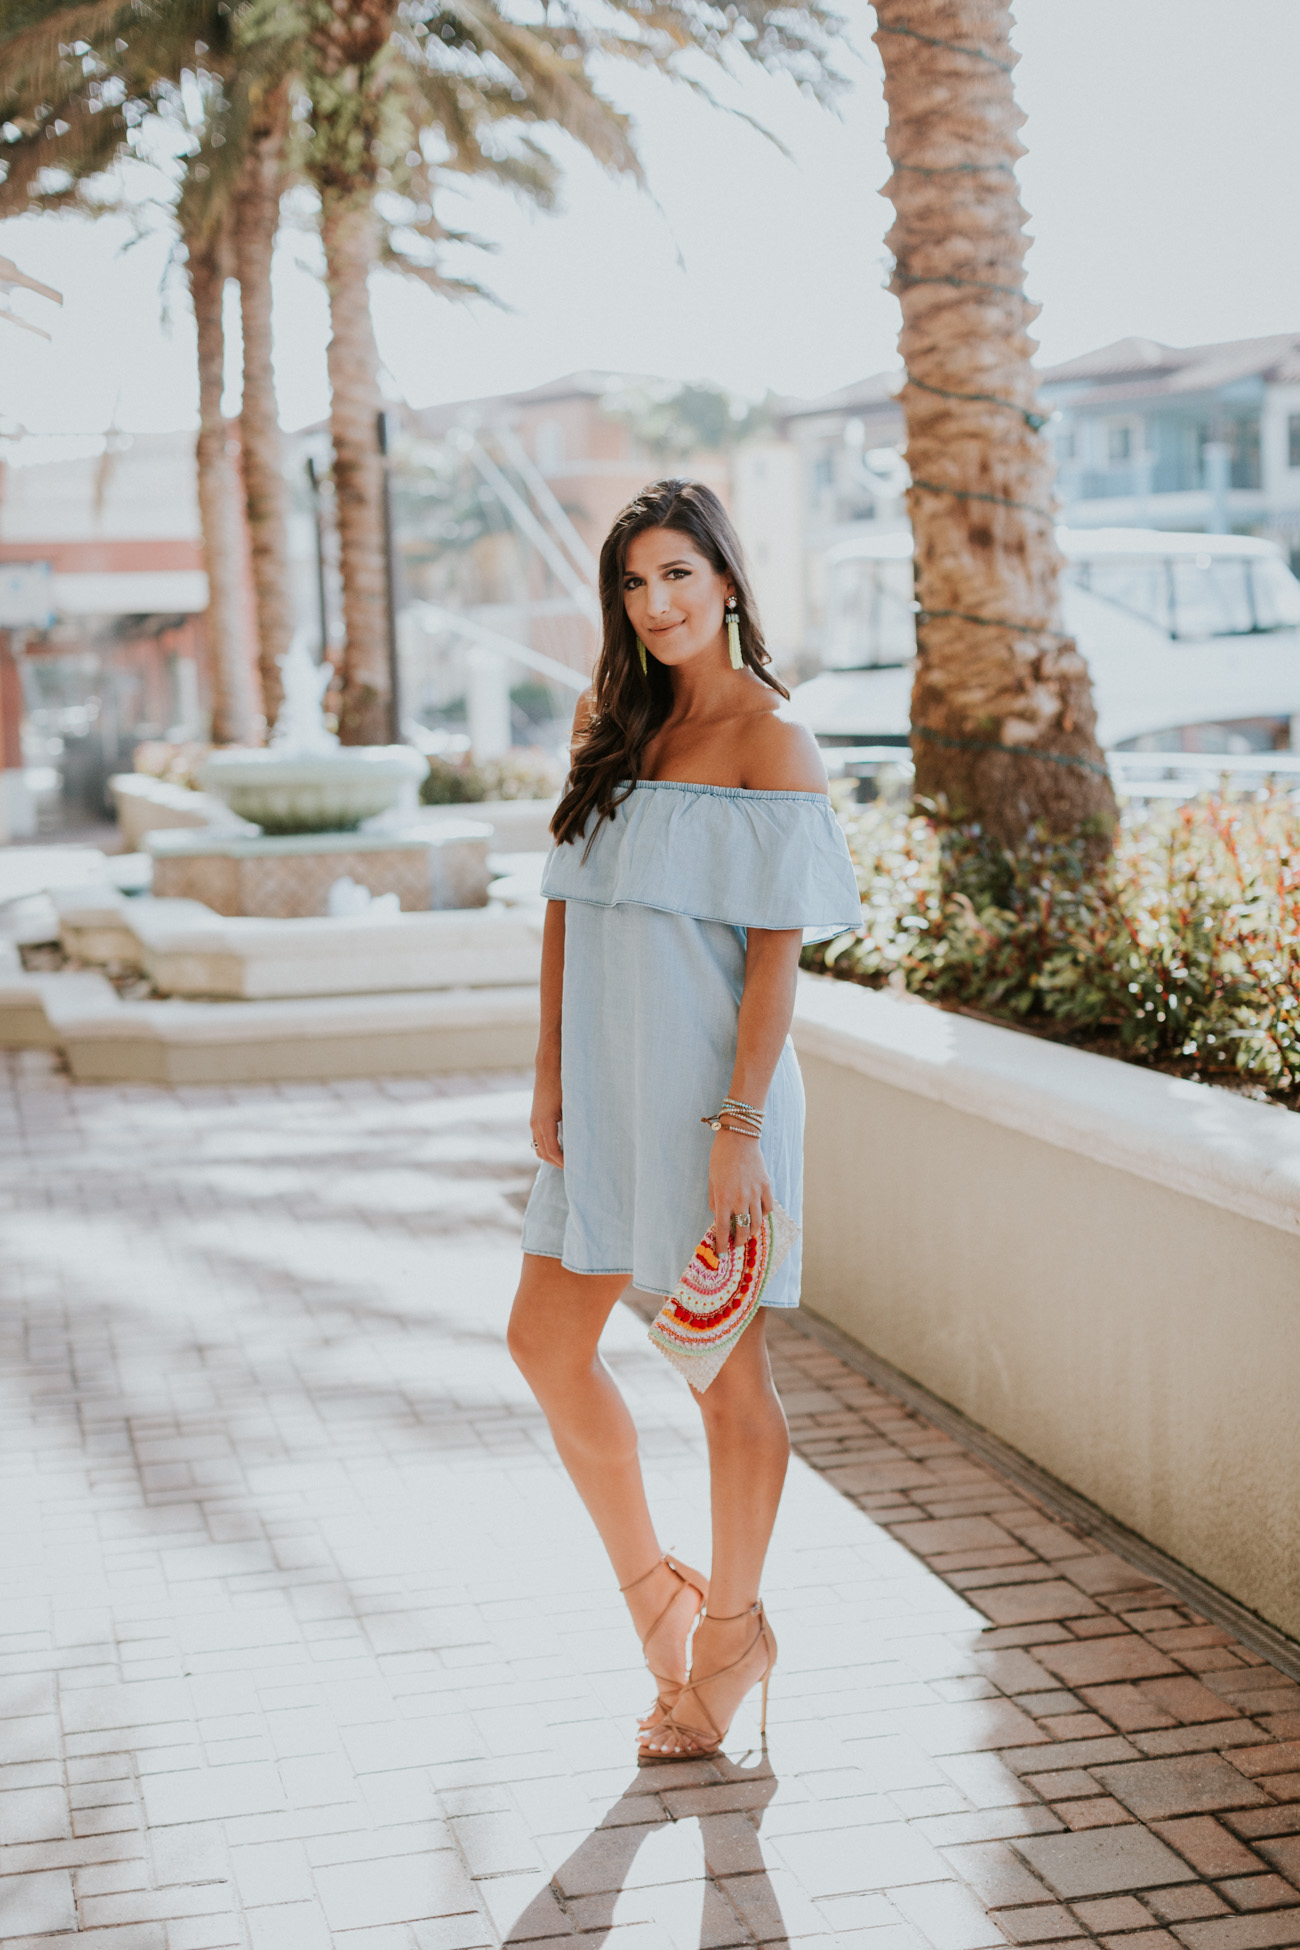 strappy neutral heels, embroidered clutch, tassel clutch, chambray off the shoulder dress, ruffle off the shoulder dress, chambray dress, embroidered clutch, vacation style, turquoise tassel earrings, nude wedges, strappy wedge sandals, tassel clutch // grace wainwright a southern drawl